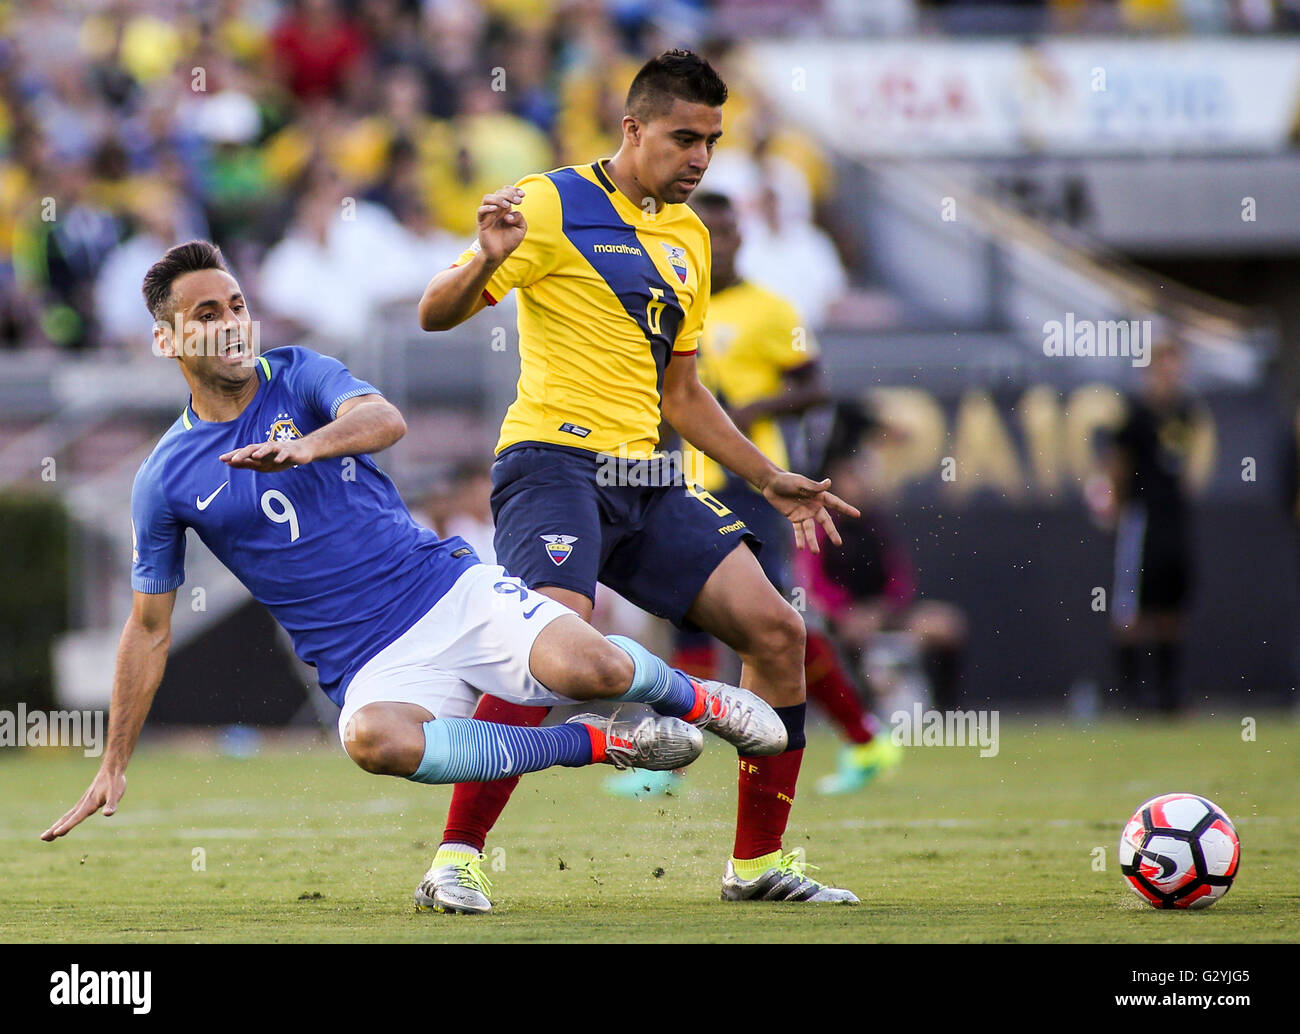 Pasadena, USA. 4th June, 2016. Jonas (L) of Brazil vies with Christian Noboa of Ecuador during their 2016 Copa America Centenario Group B match in Pasadena, the United States, June 4, 2016. The match ended with a 0-0 draw. © Zhao Hanrong/Xinhua/Alamy Live News Stock Photo